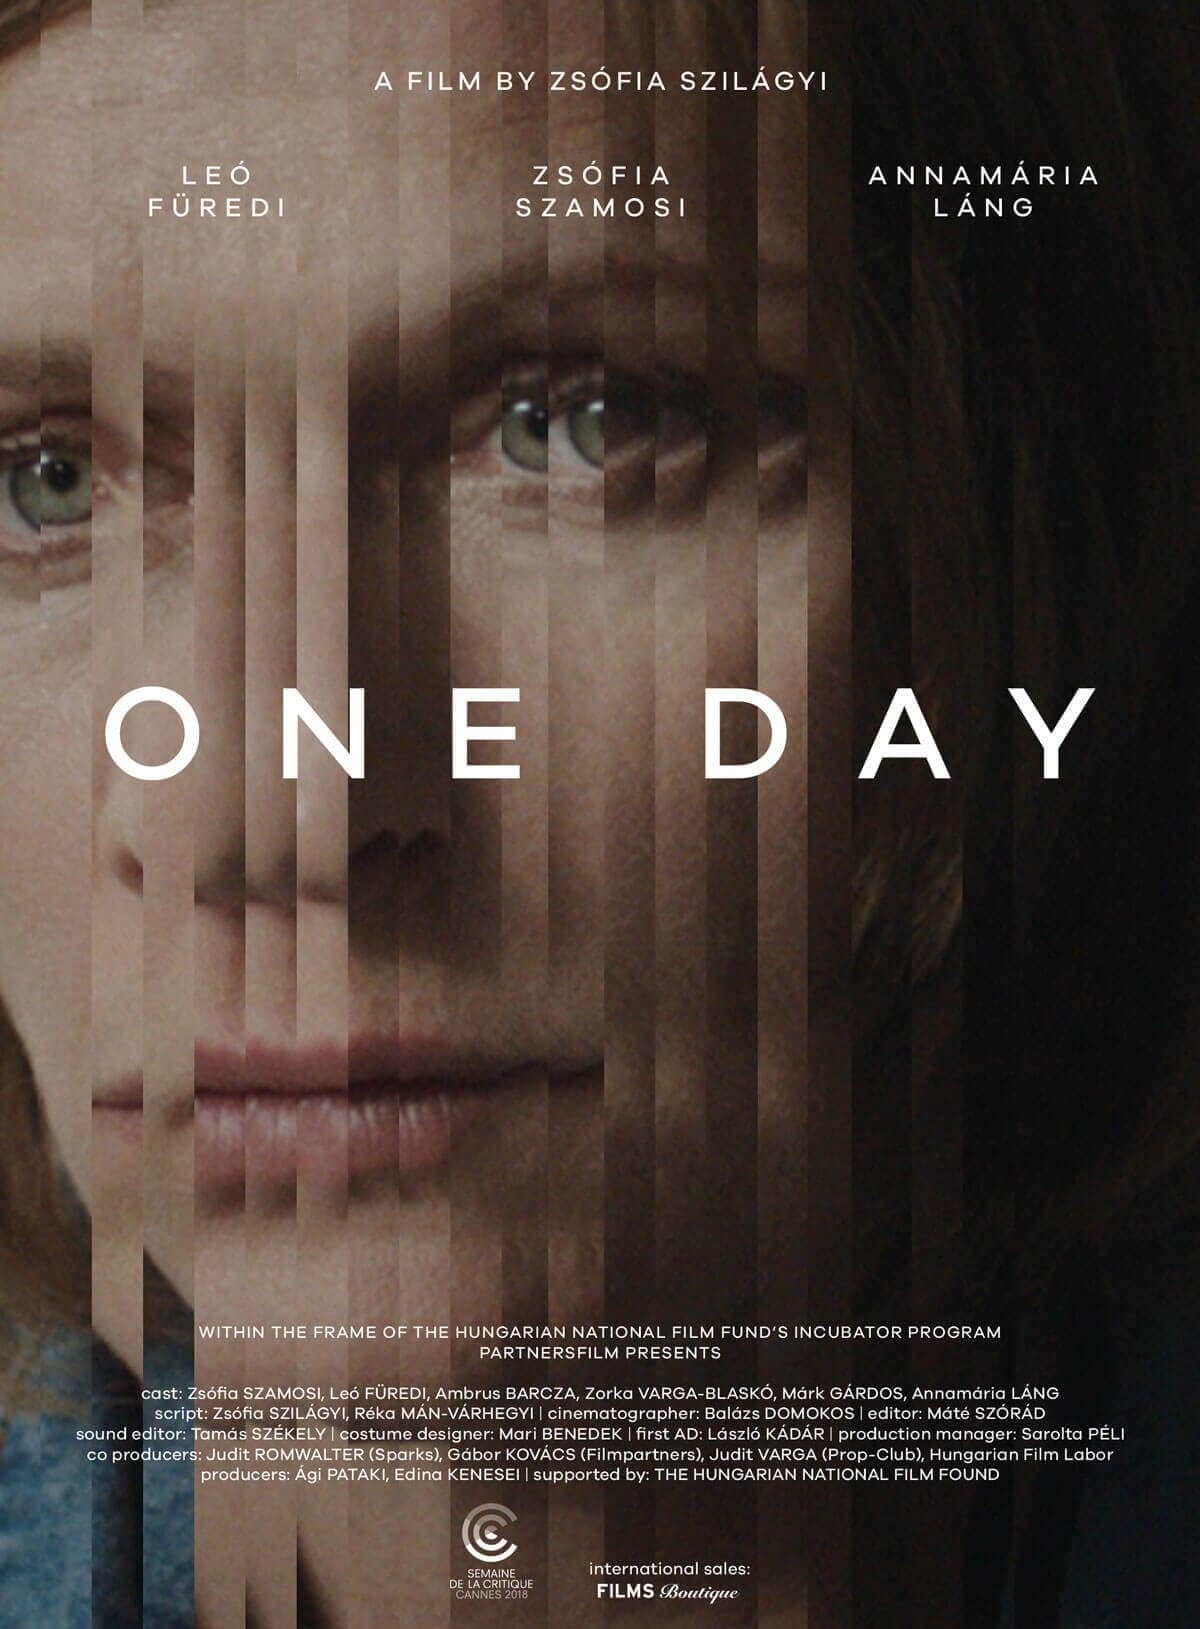 one day poster e1571844929660